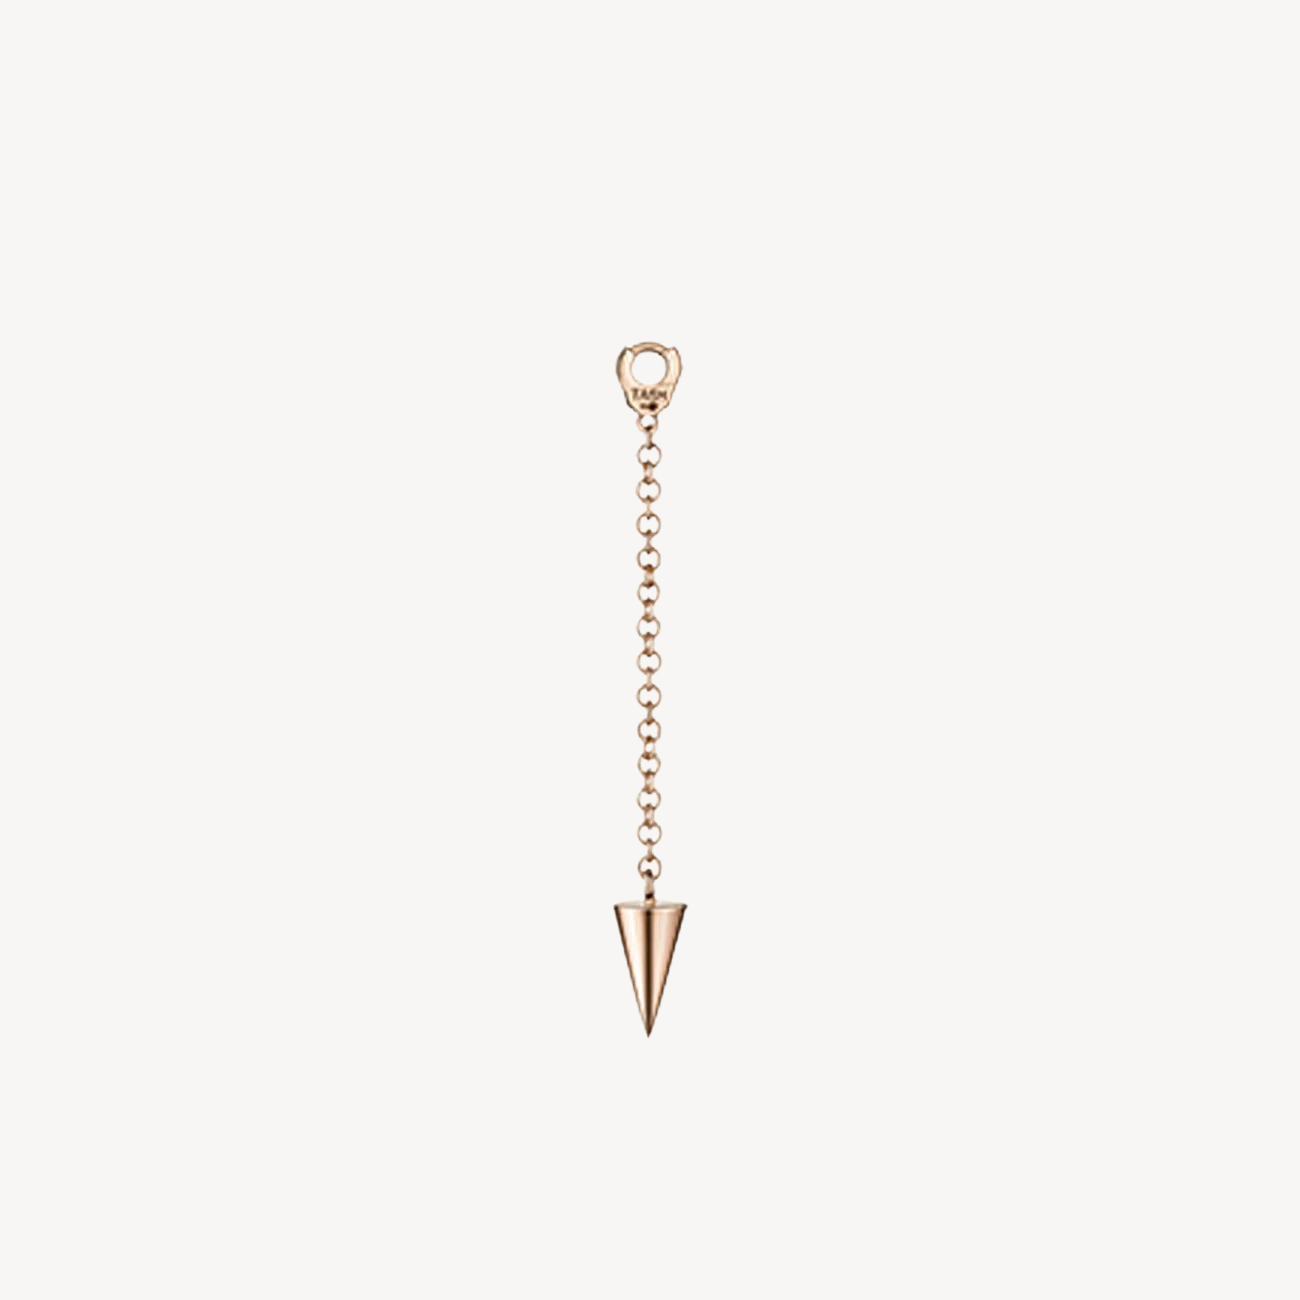 Pendulum Charm with Short Spike Rose Gold